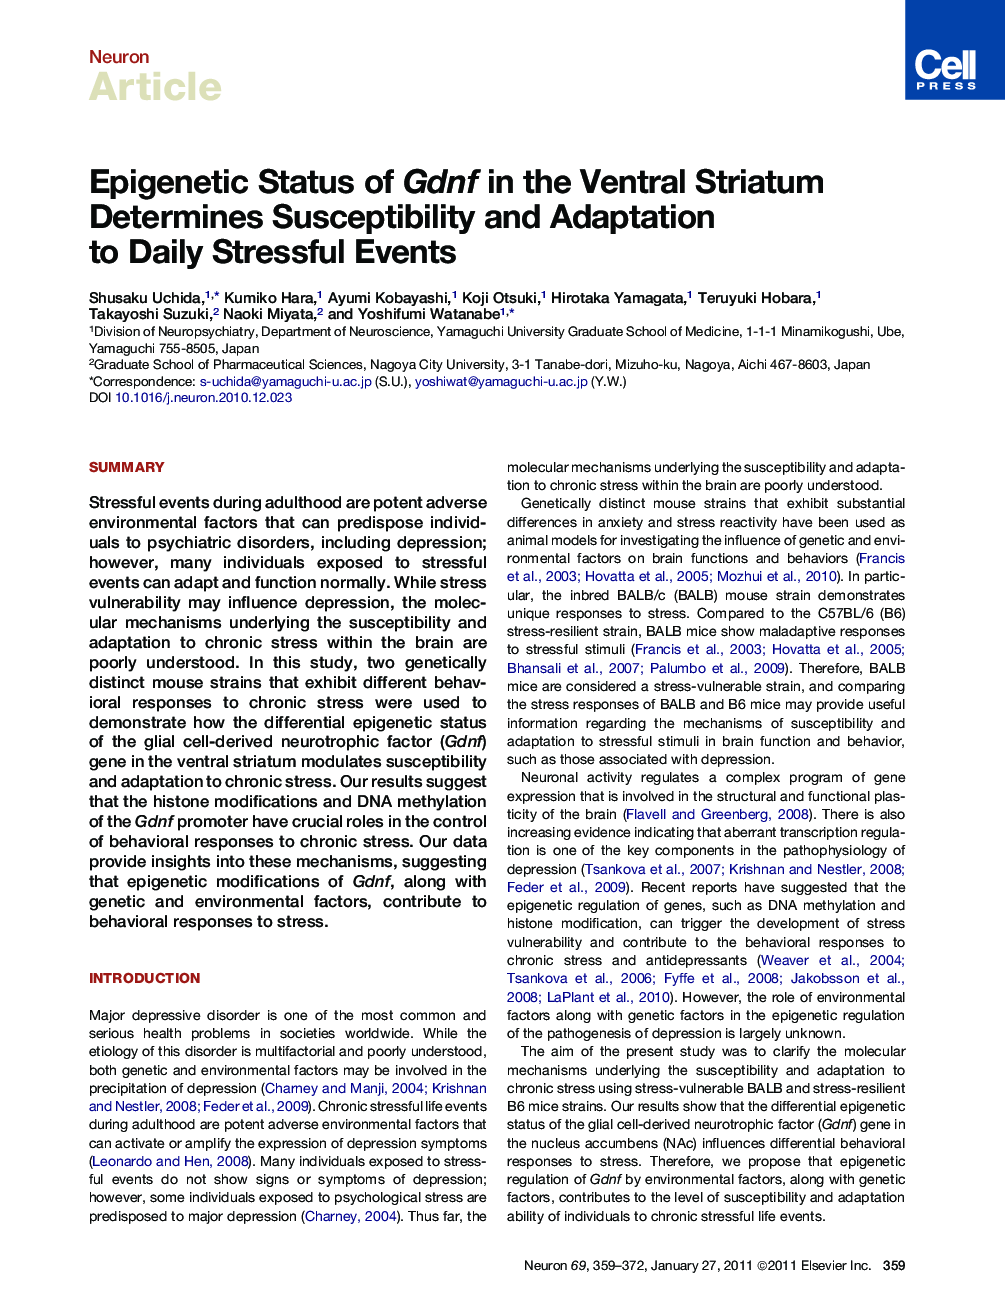 Epigenetic Status of Gdnf in the Ventral Striatum Determines Susceptibility and Adaptation to Daily Stressful Events